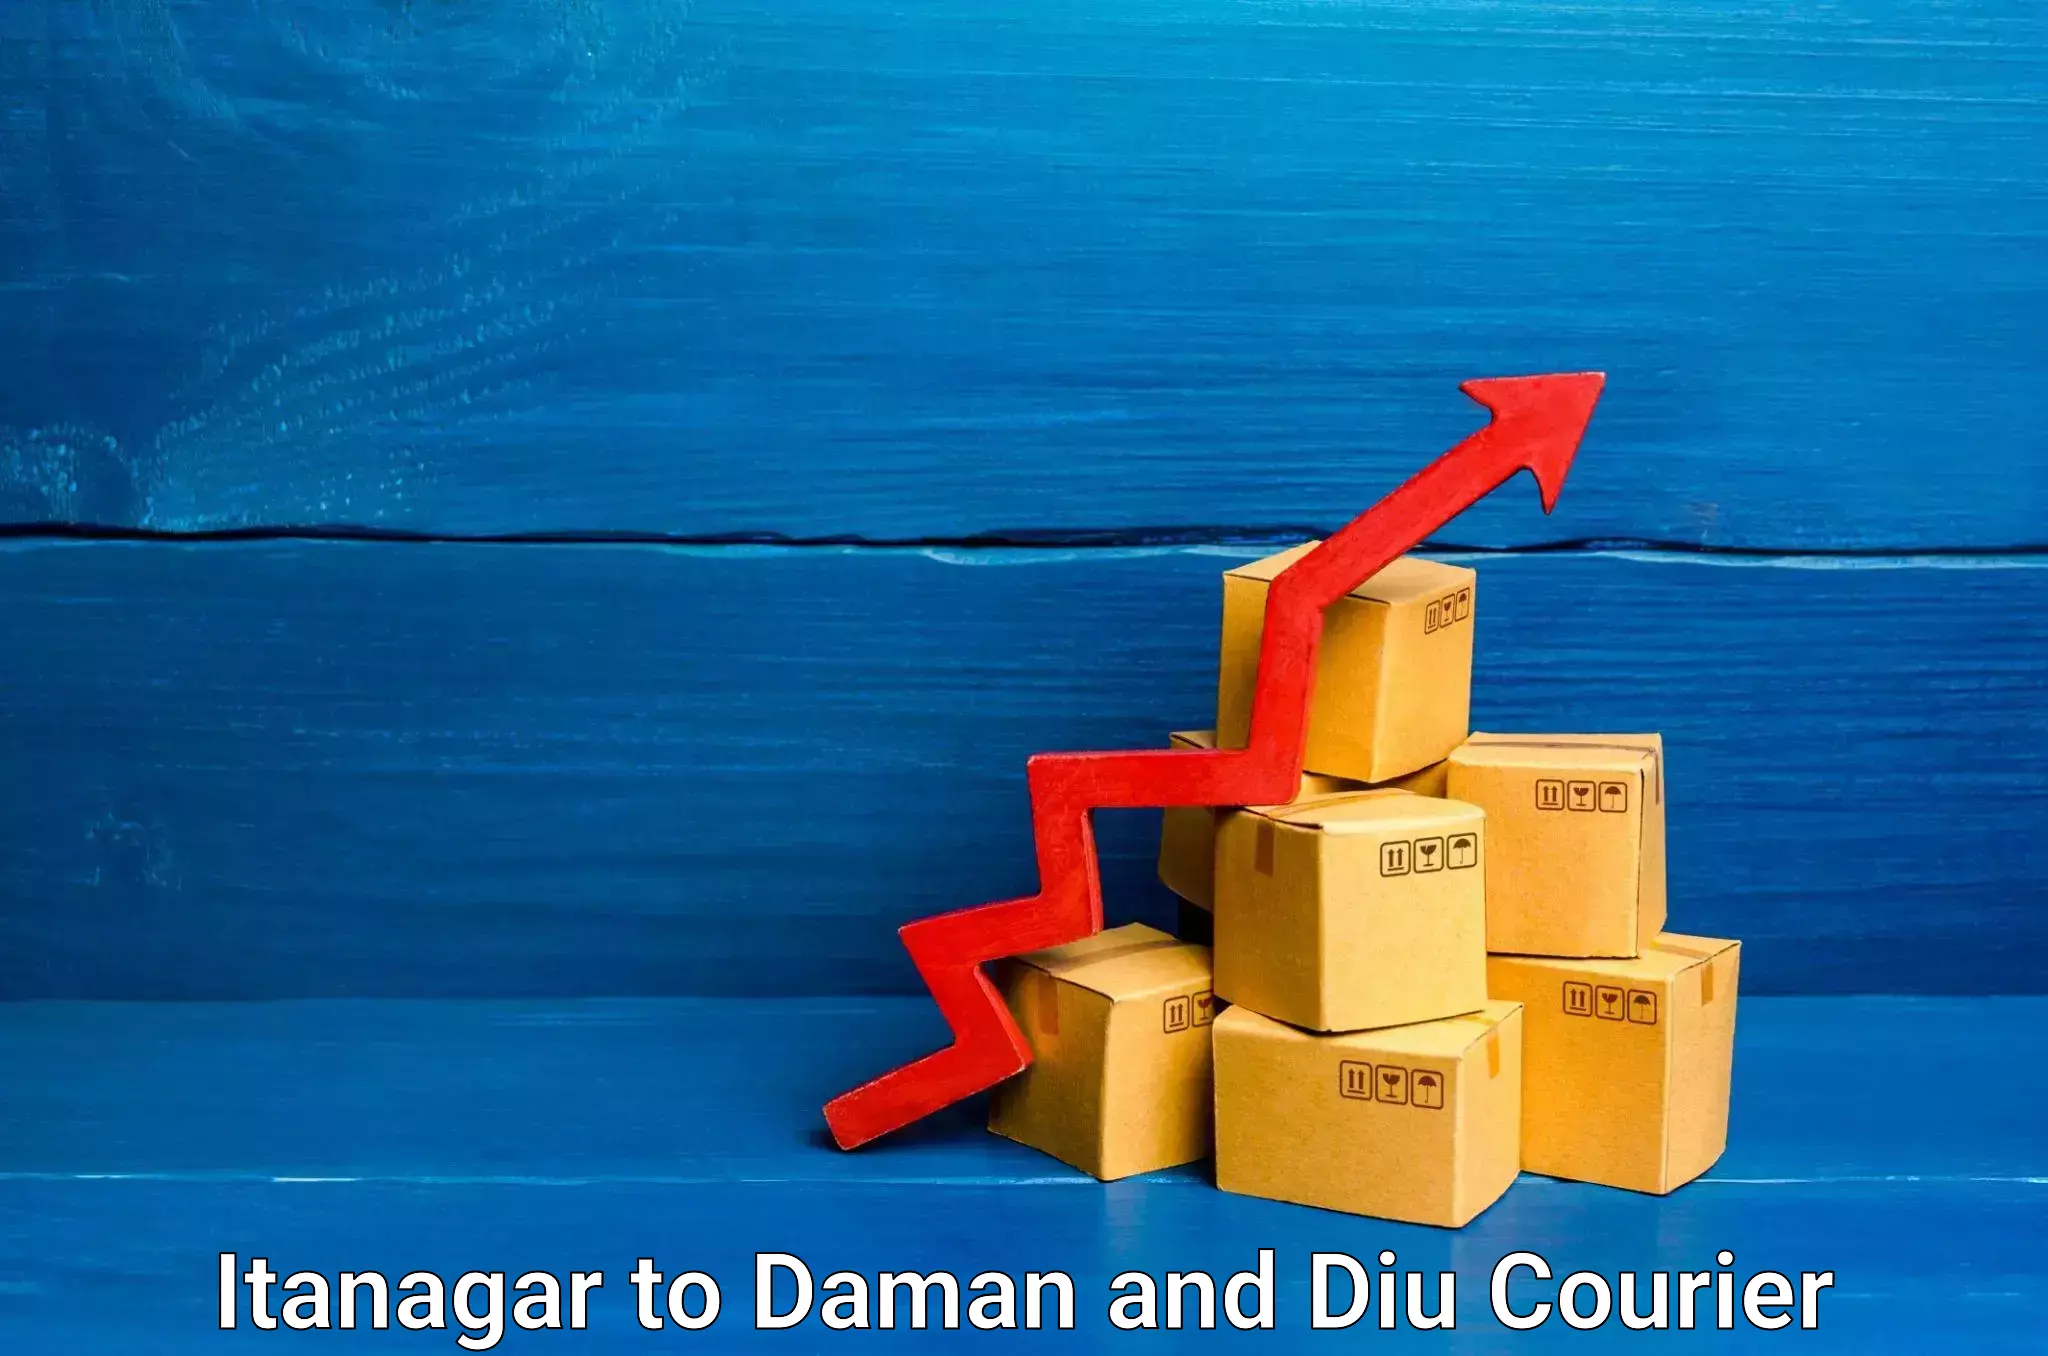 Package delivery network Itanagar to Daman